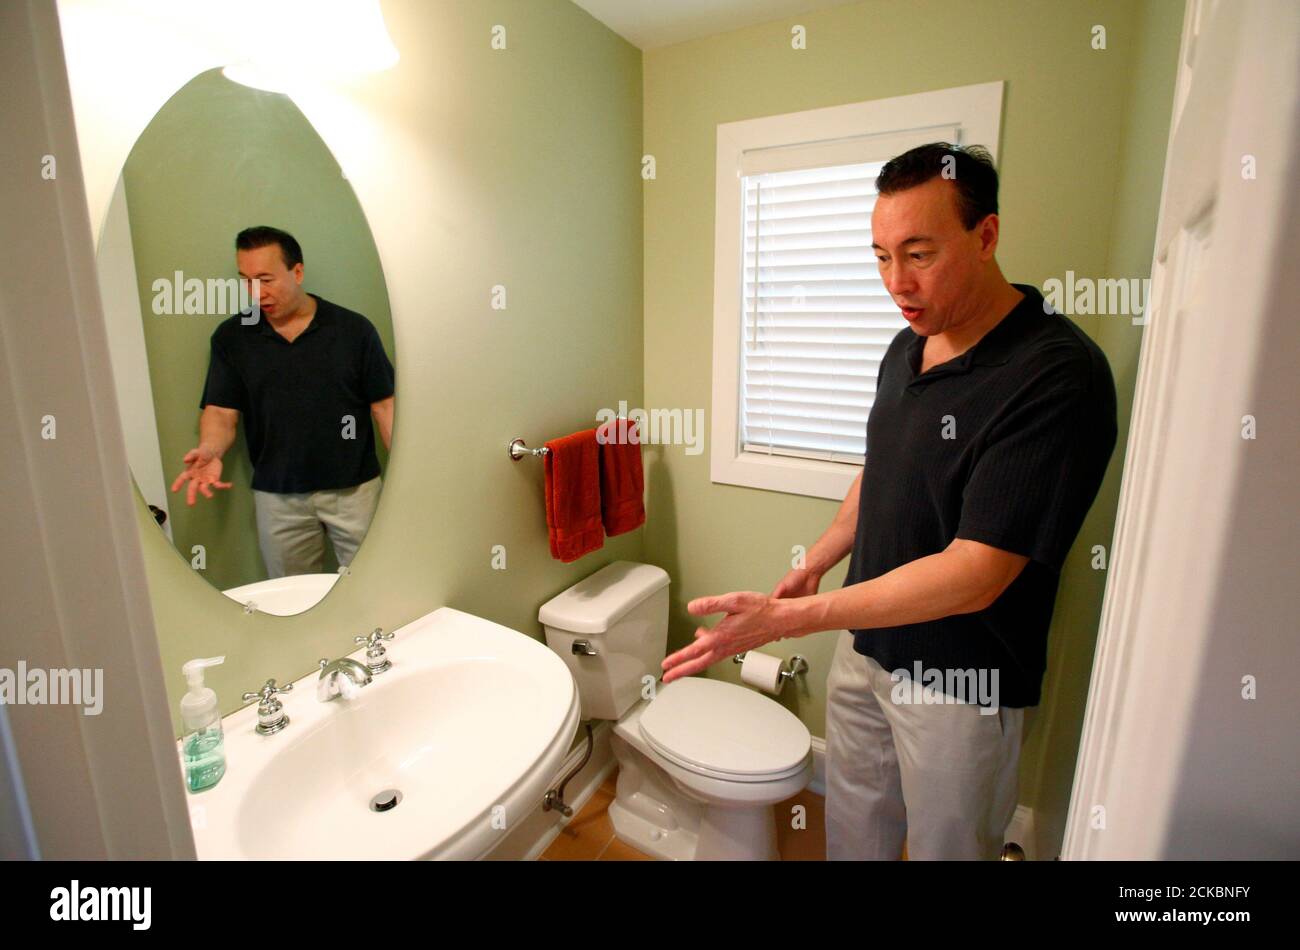 Real estate investor Lance Young describes to visitors the bathroom renovations that he has done in one of the distressed houses that he has purchased to renovate and resell in the Washington suburb of Arlington, Virginia, June 29, 2011. Young buys several discounted or distressed houses a year and then tries to make a substantial profit after performing major renovations on them. Often blamed for helping to create the U.S. housing boom and crash by driving up prices, investors are now welcomed as a key support for the battered property market. Picture taken June 29, 2011. To match Feature USA Stock Photo